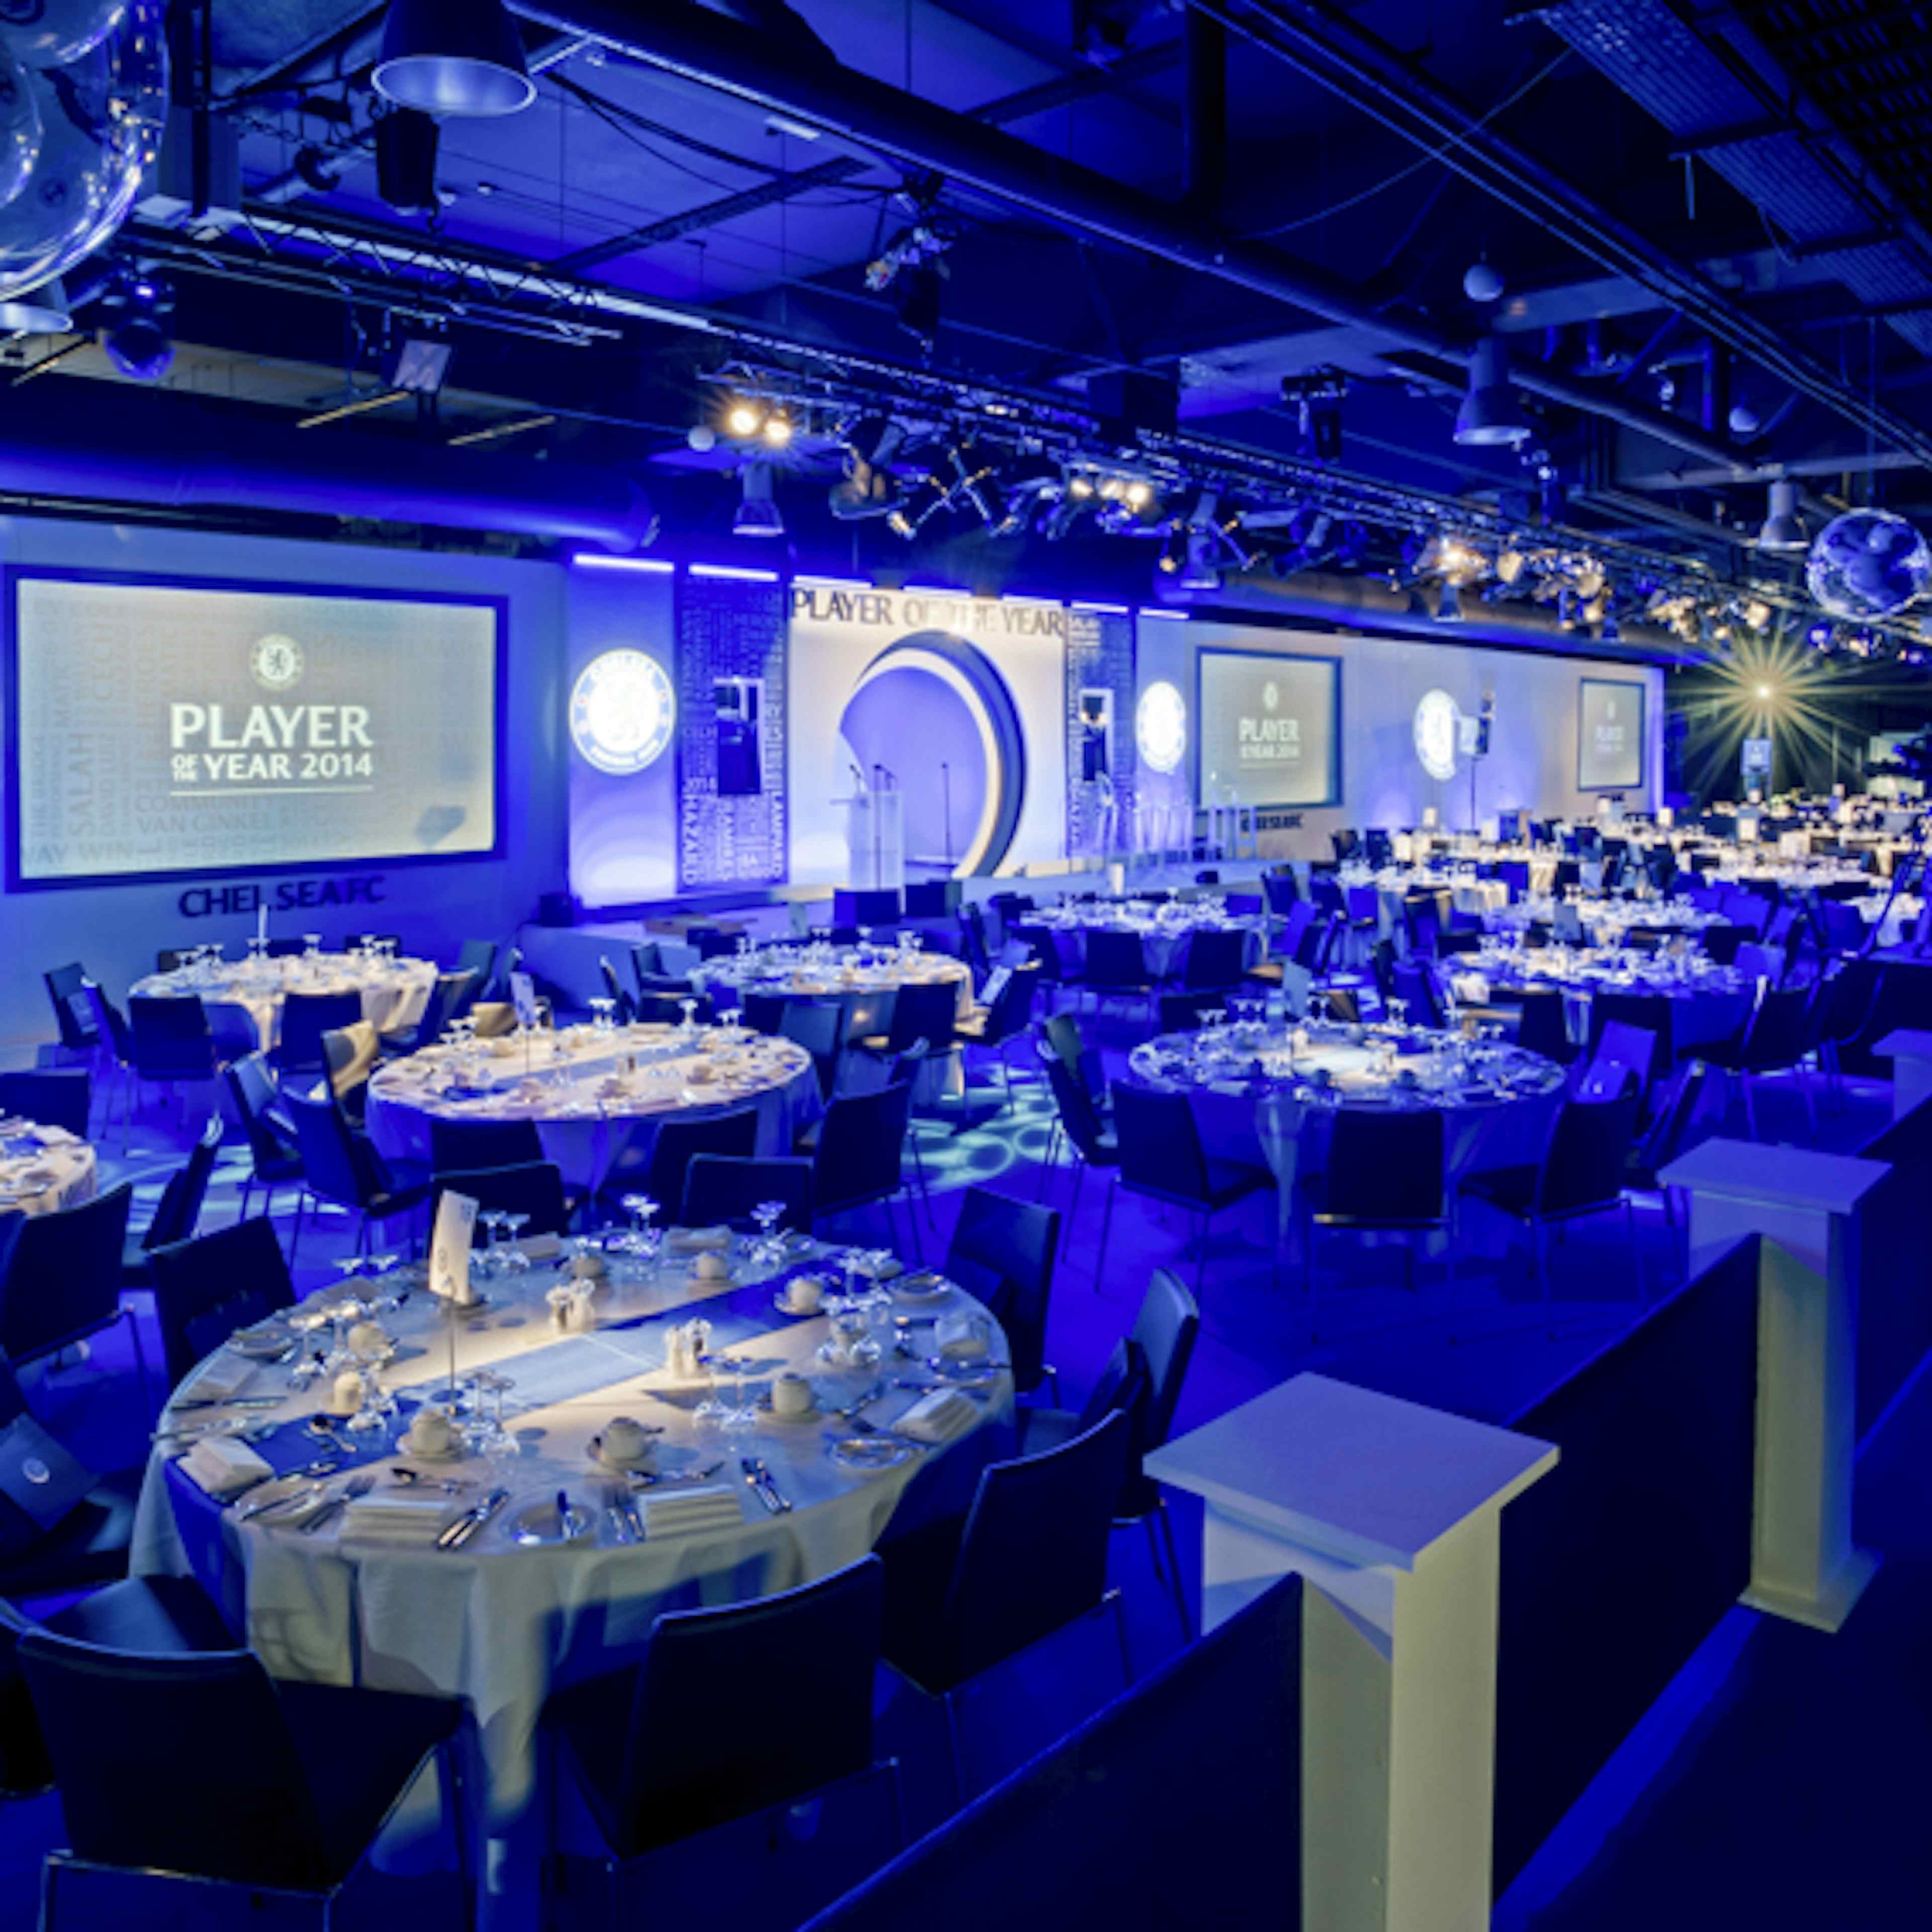 Chelsea Football Club - The Great Hall image 3